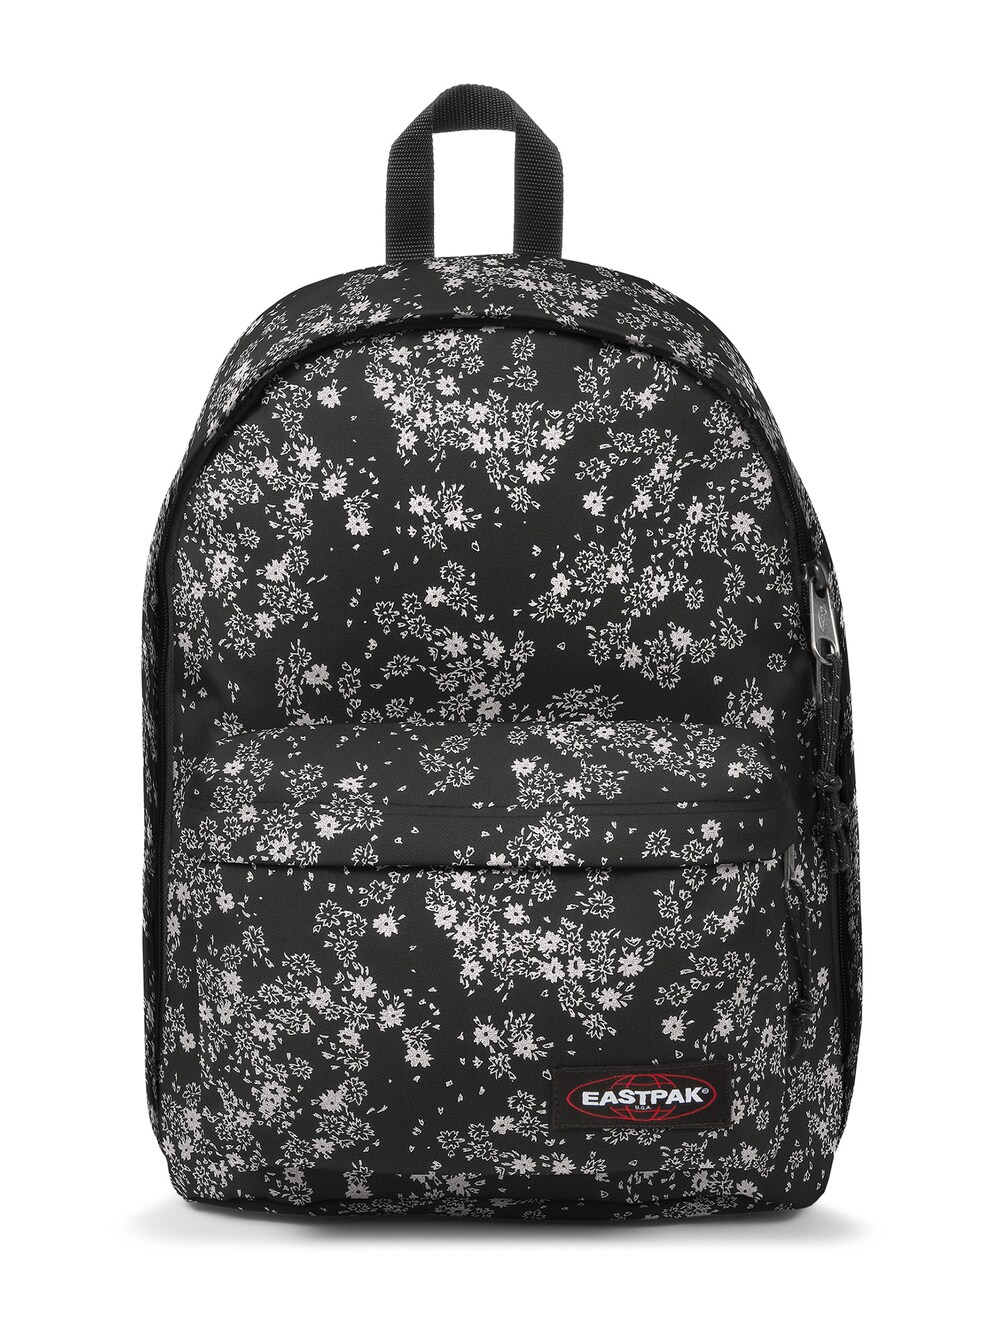 Рюкзак EASTPAK Out Of Office, антрацит рюкзак ek767c44 out of office c44 muted dark